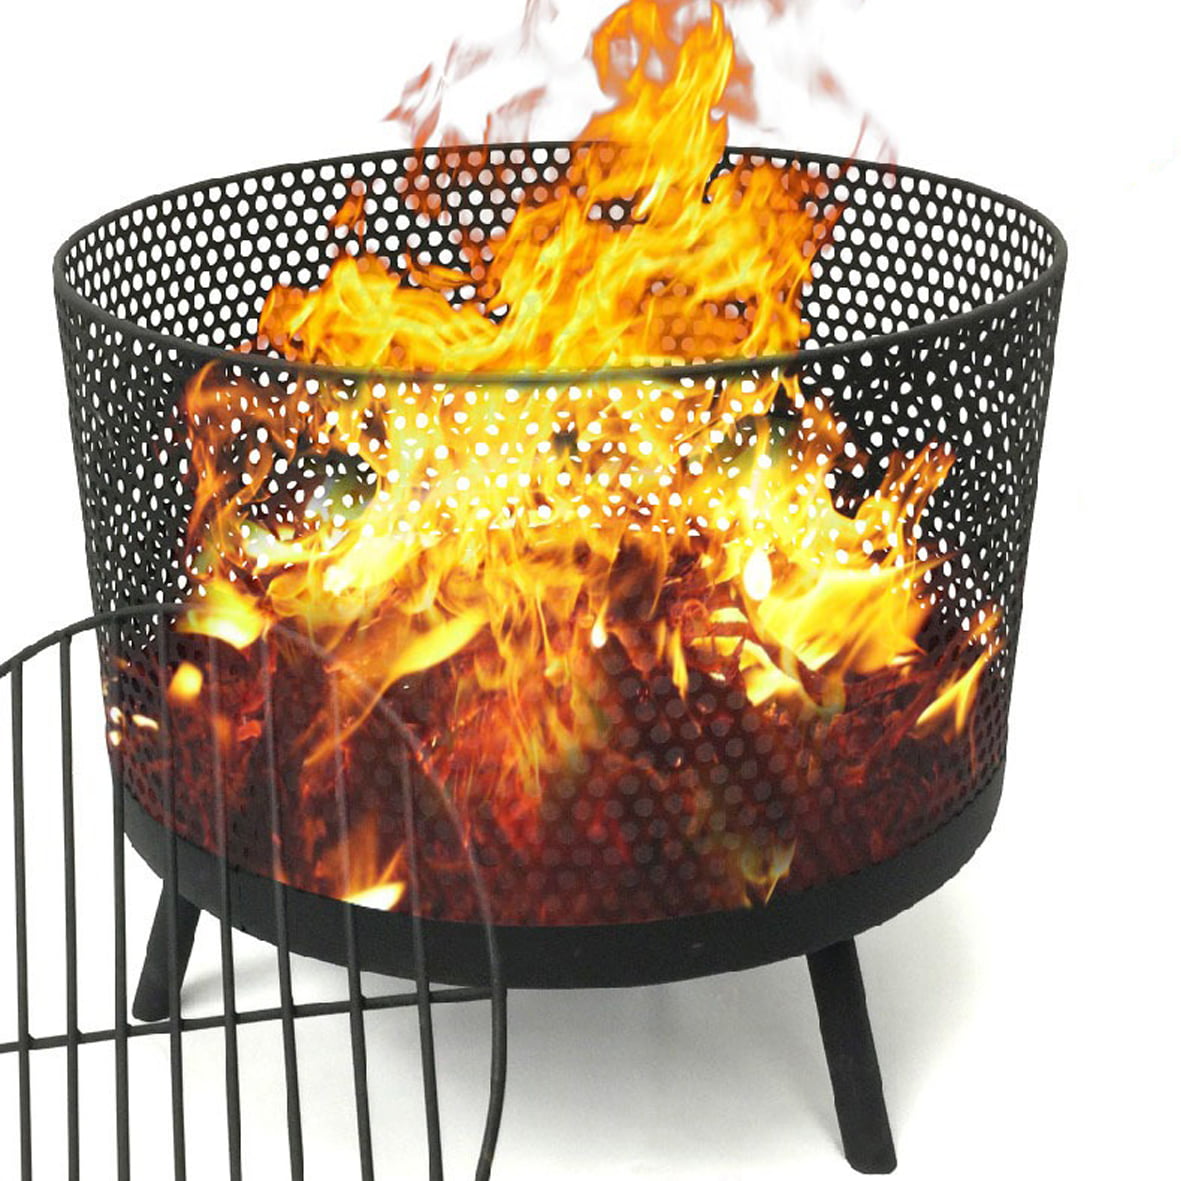 Easygo Camping Patio Outdoor Fire Pit, Long Lasting Fire Pit